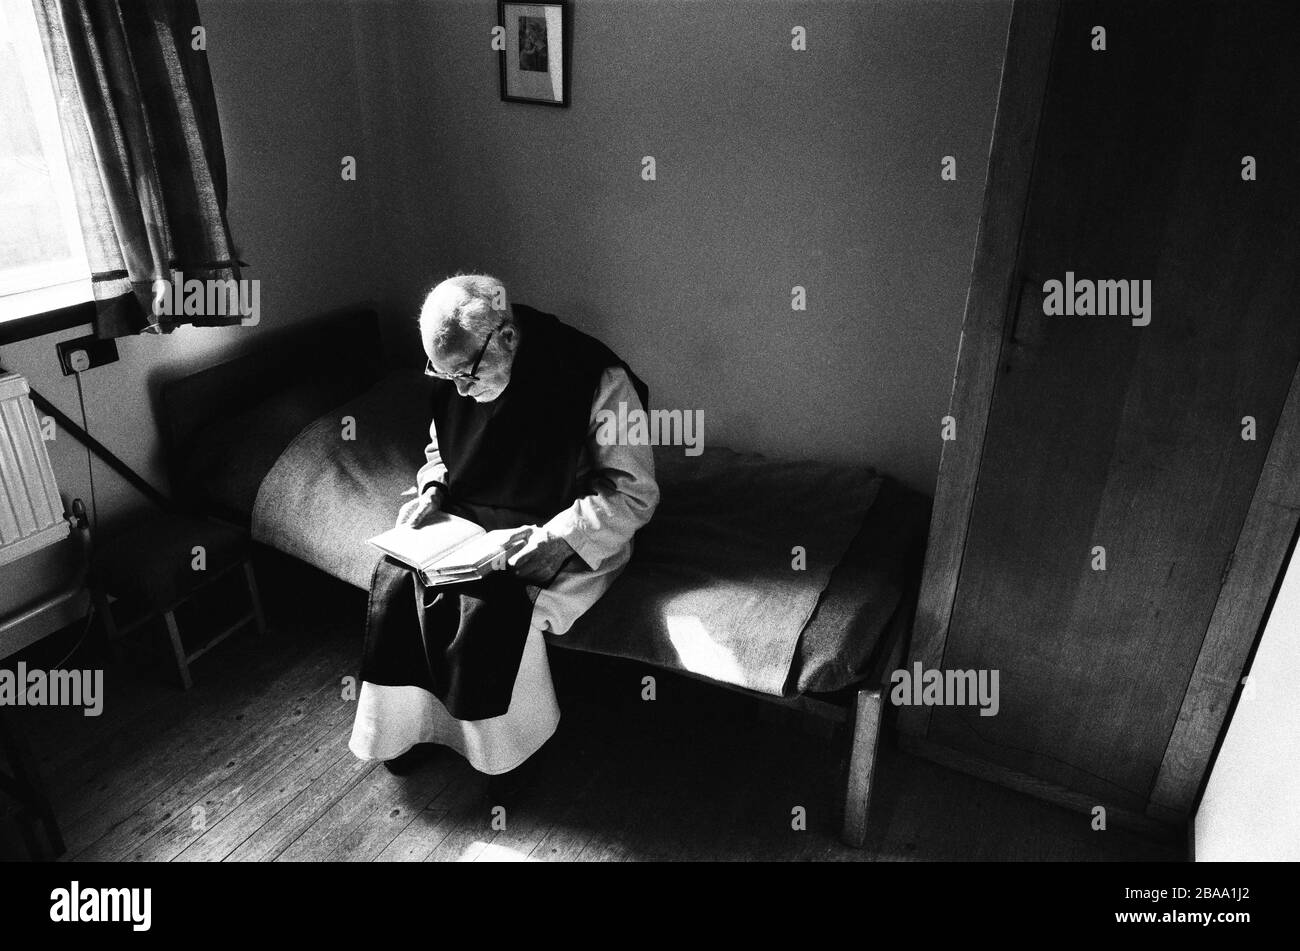 A monk reading in his room at Sancta Maria Abbey at Nunraw, East Lothian, home since 1946 to the Order of Cistercians of the Strict Observance. Around 15 monks were resident at Nunraw in 1996, undertaking a mixture of daily tasks and strict religious observance. The present purpose-built building dates from 1969 when the monks moved from the nearby Nunraw house. Stock Photo